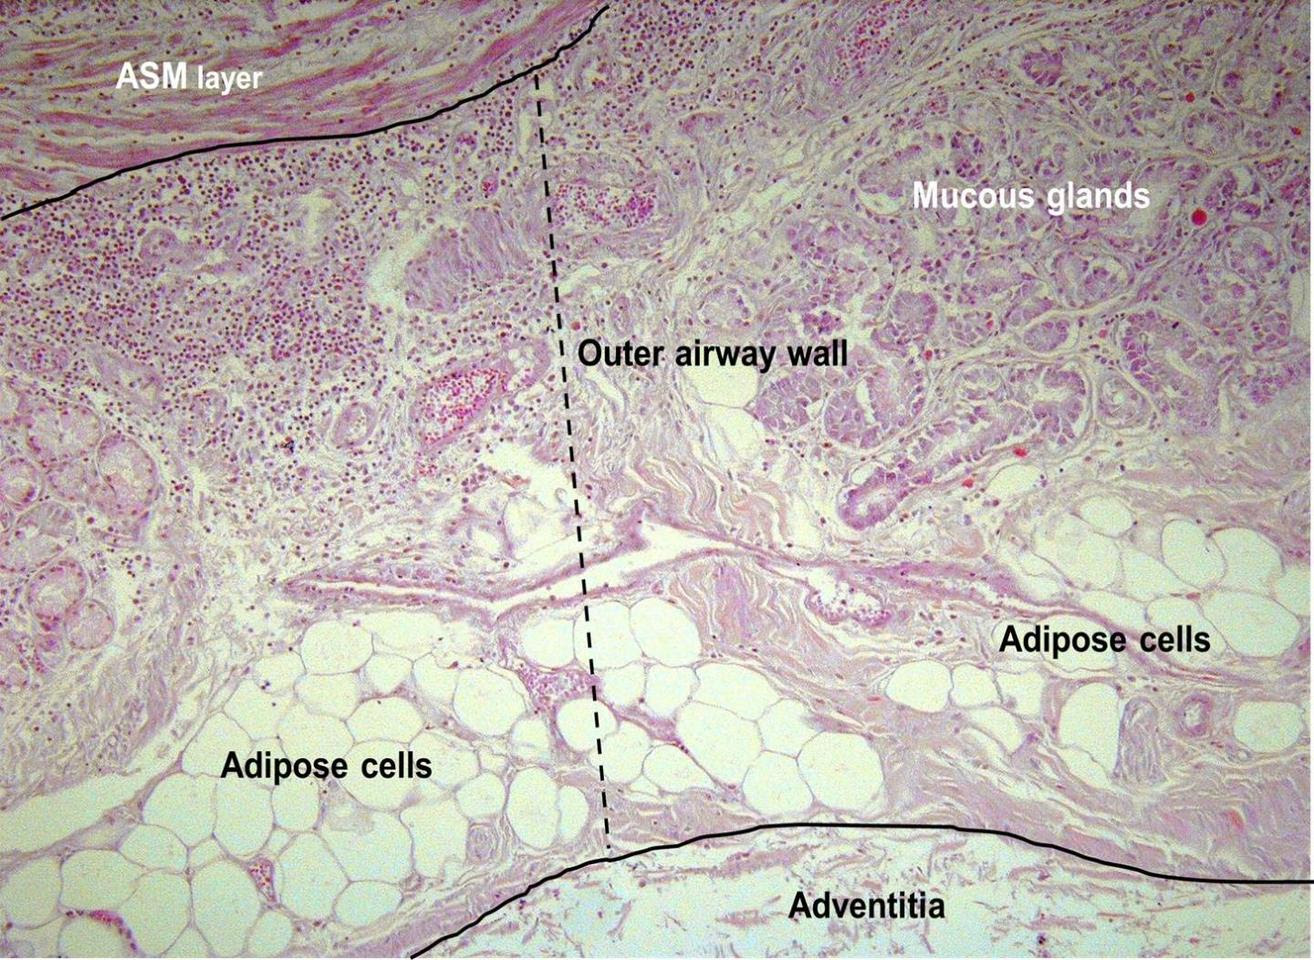 The outer airway wall, between the airway smooth muscle (ASM) layer and the airway adventitia (dashed line) showing adipose tissue and mucous glands.